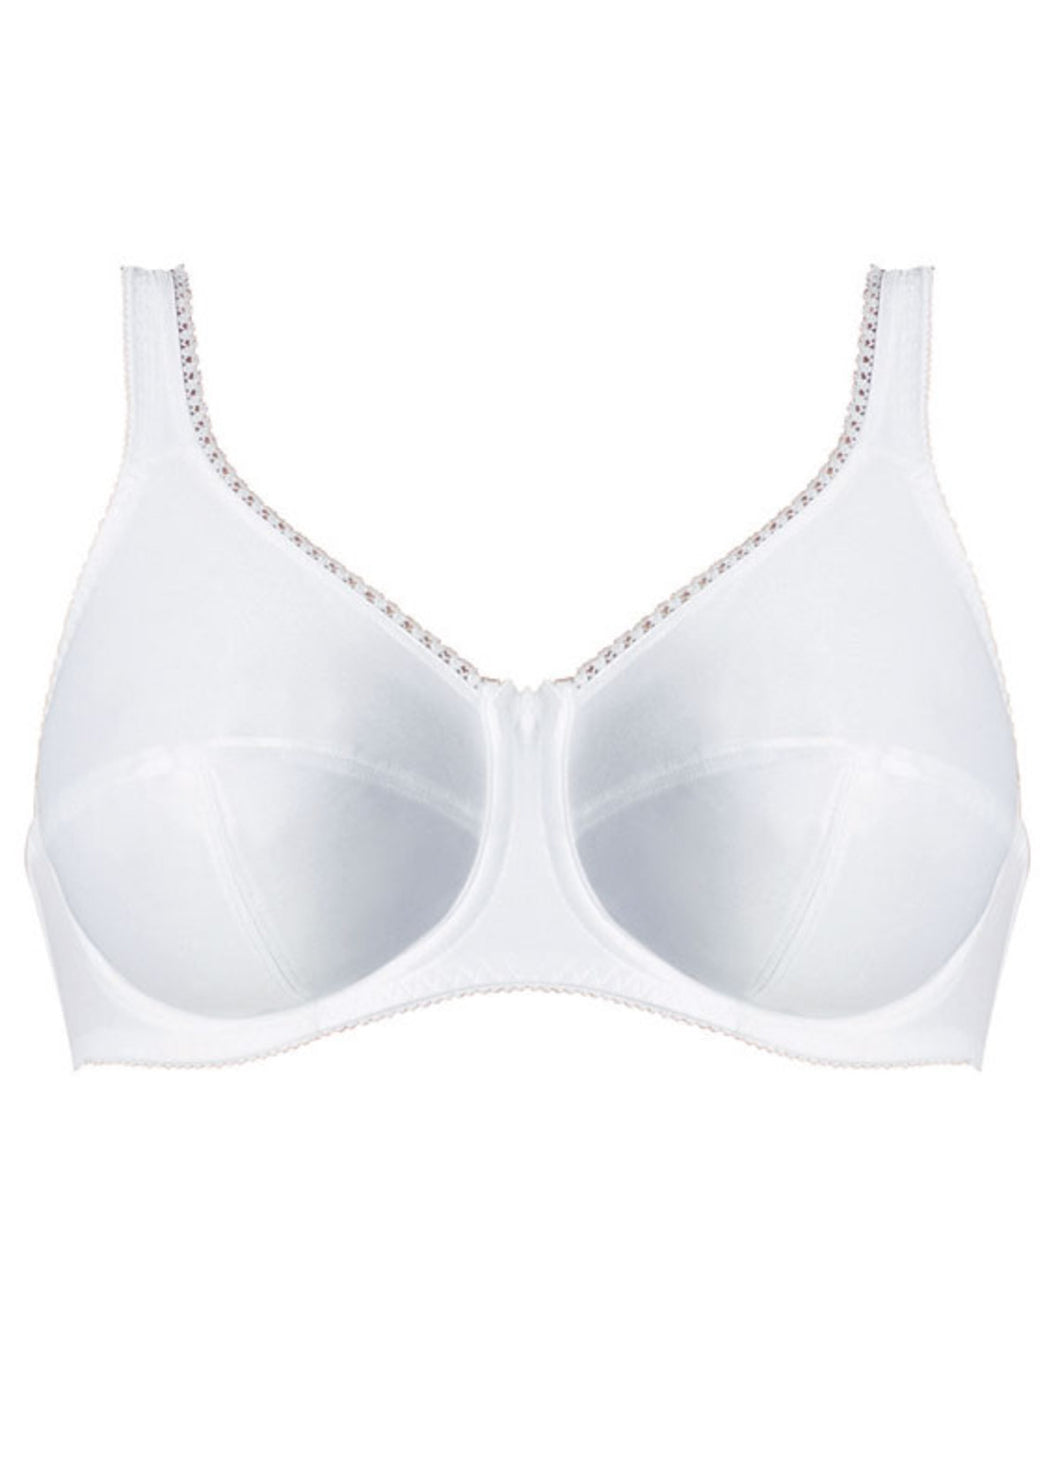 FANTASIE SPECIALITY SMOOTH CUP BRA